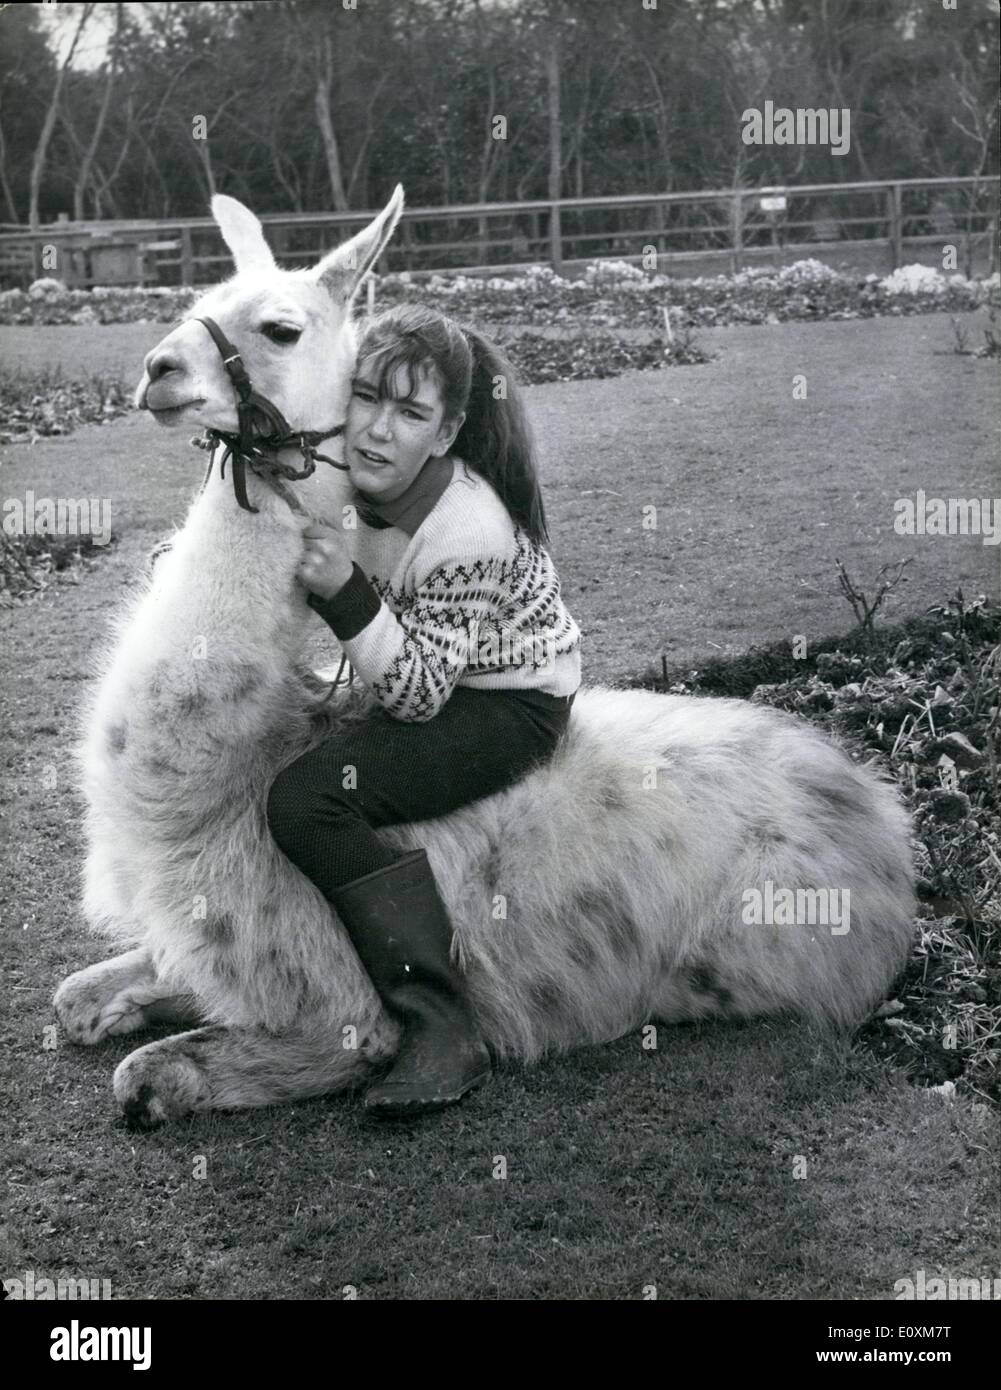 Apr. 04, 1967 - Julie takes a ride - on a Llama.: 13-year old Julie Cook would raise a few horsey eyebrows is he were to venture near the racing turf on this white charger, and she has already caused something of a scandal in the Llama compound at Flamingo Park Zoo, Yorkshire. For the fact is that Llamas just don't carry passengers - it's unheard of - and the other llamas were quite indignant about it when Julie rode her pet llama, Liberty, along their paddock the other day Stock Photo